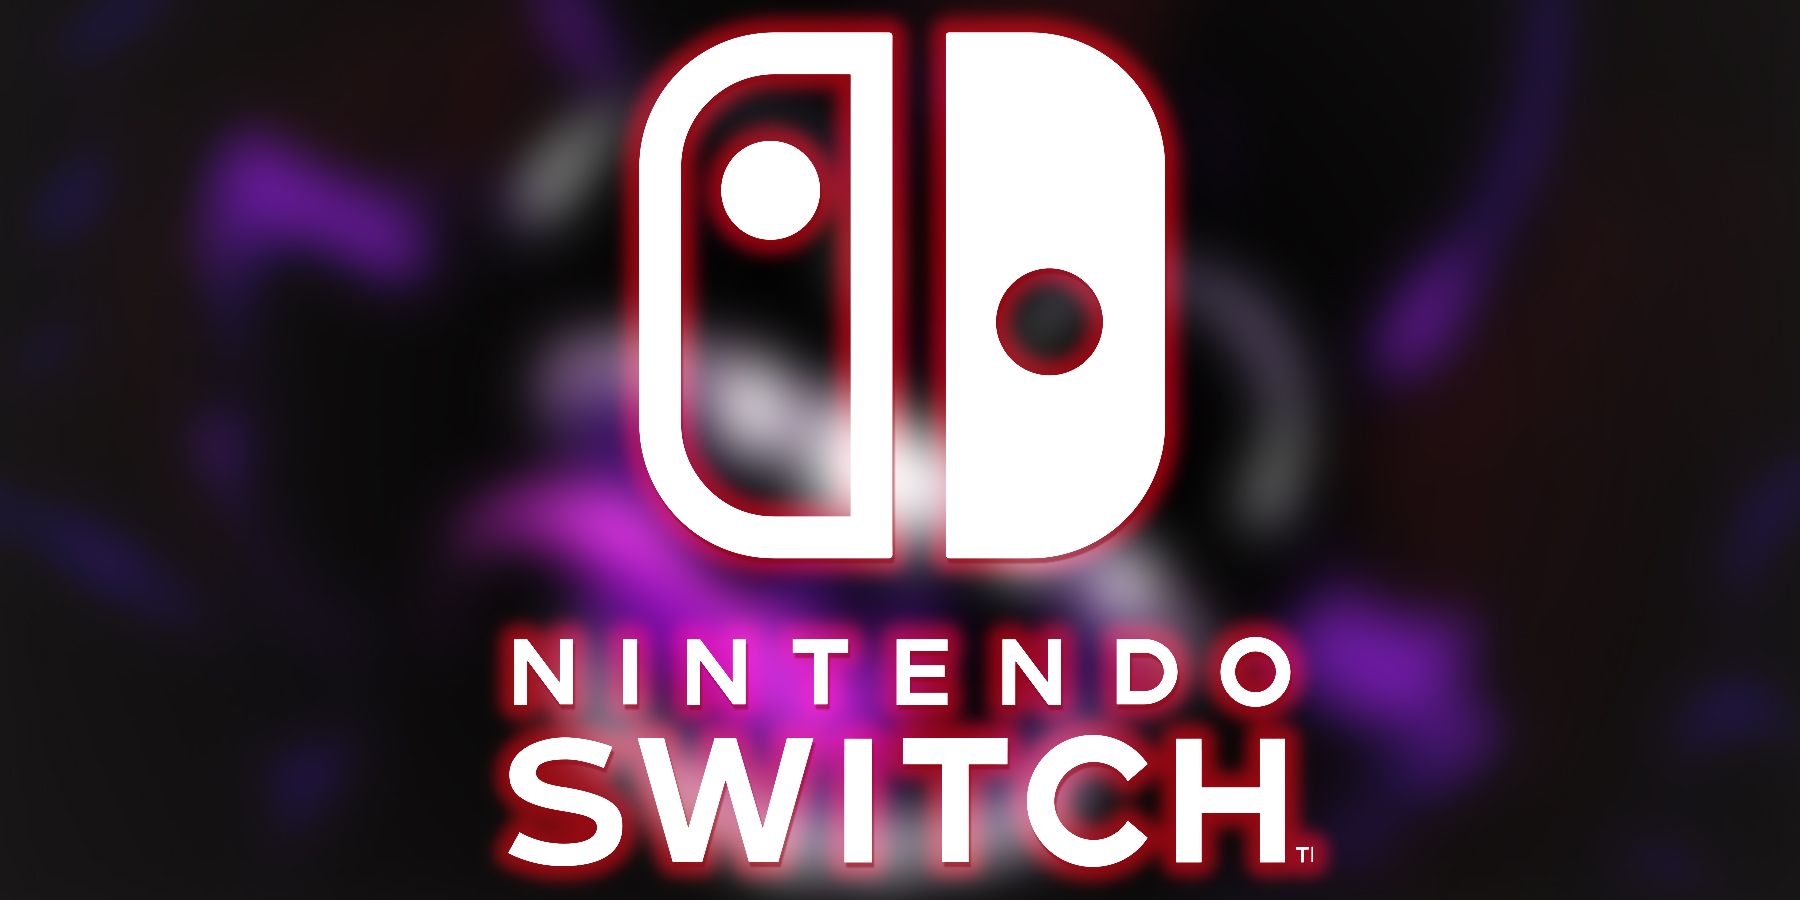 white Nintendo Switch logo with red outer glow on blurred creepy rabbit artwork from The Bunny Graveyard